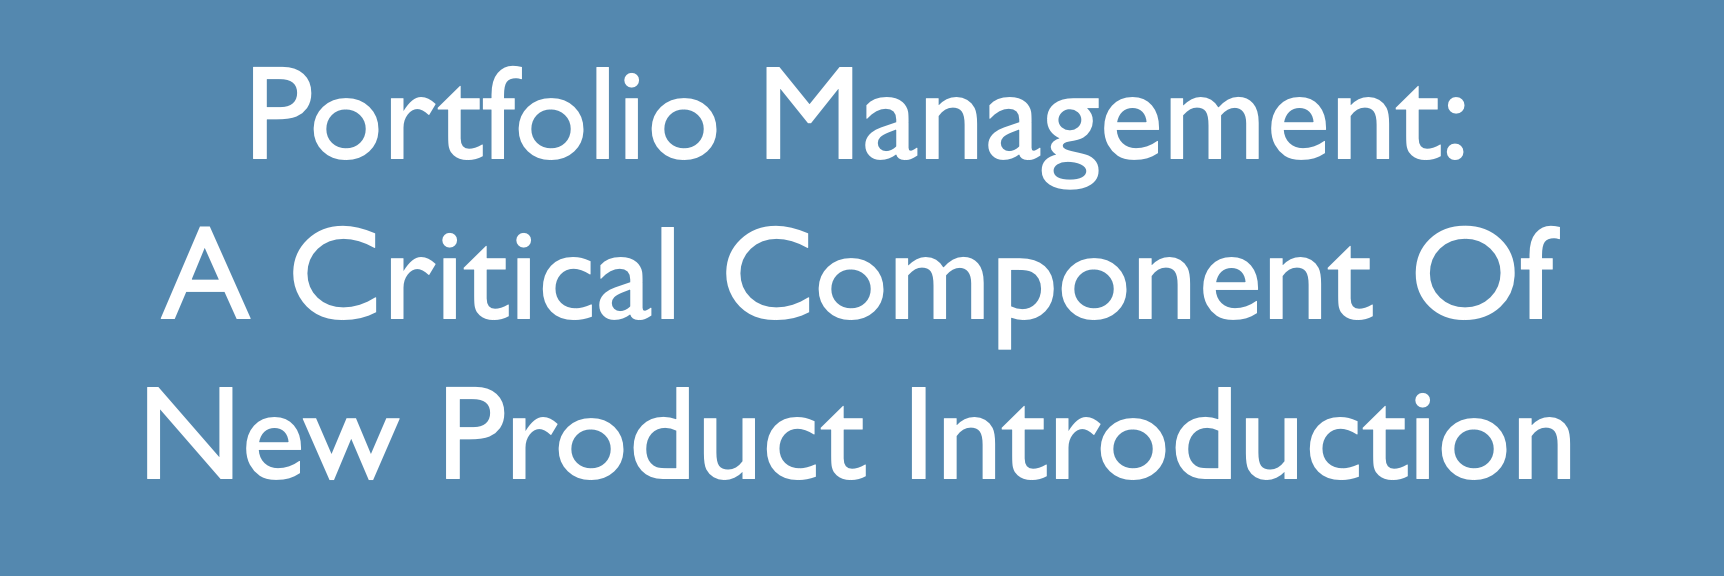 Portfolio Management: A Critical Component Of New Product Introduction